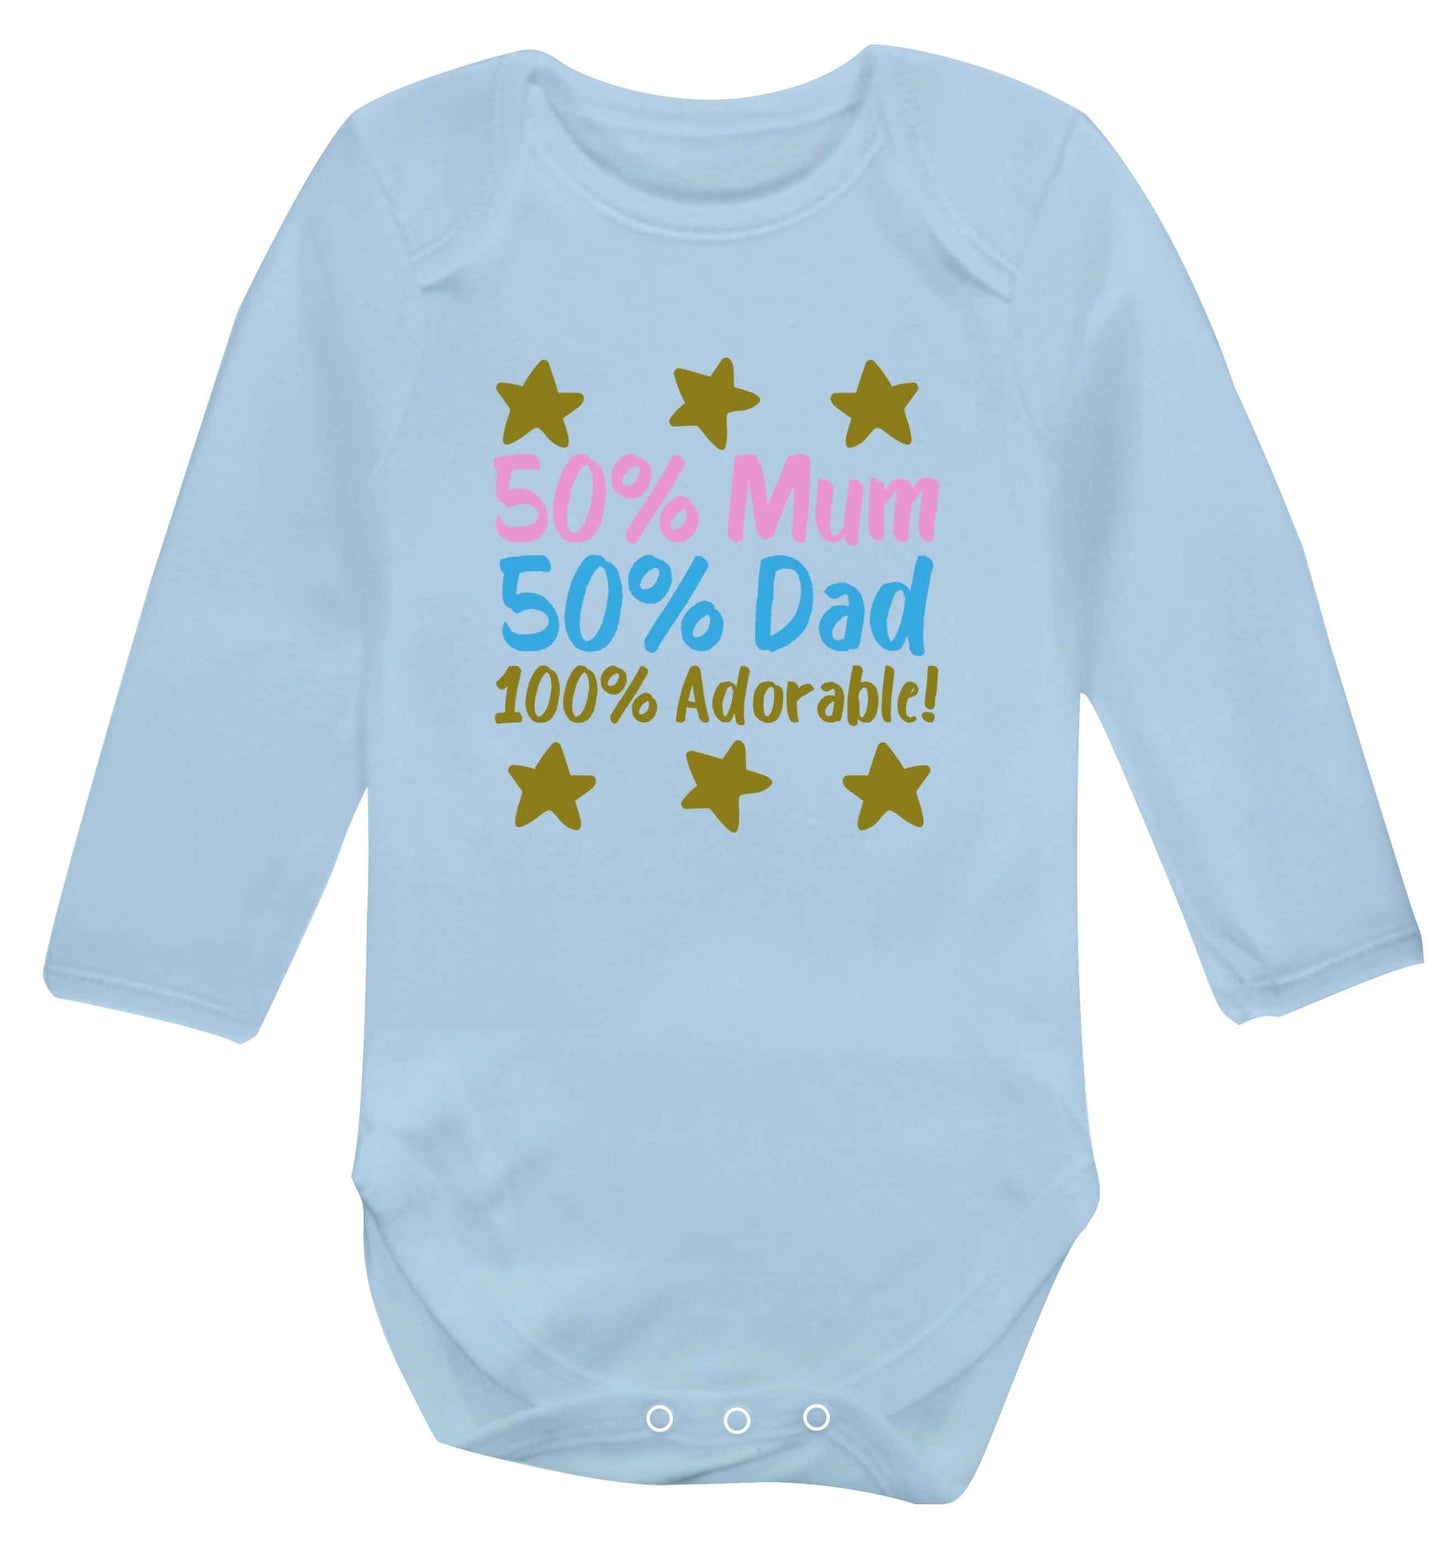 50% mum 50% dad 100% adorable baby vest long sleeved pale blue 6-12 months